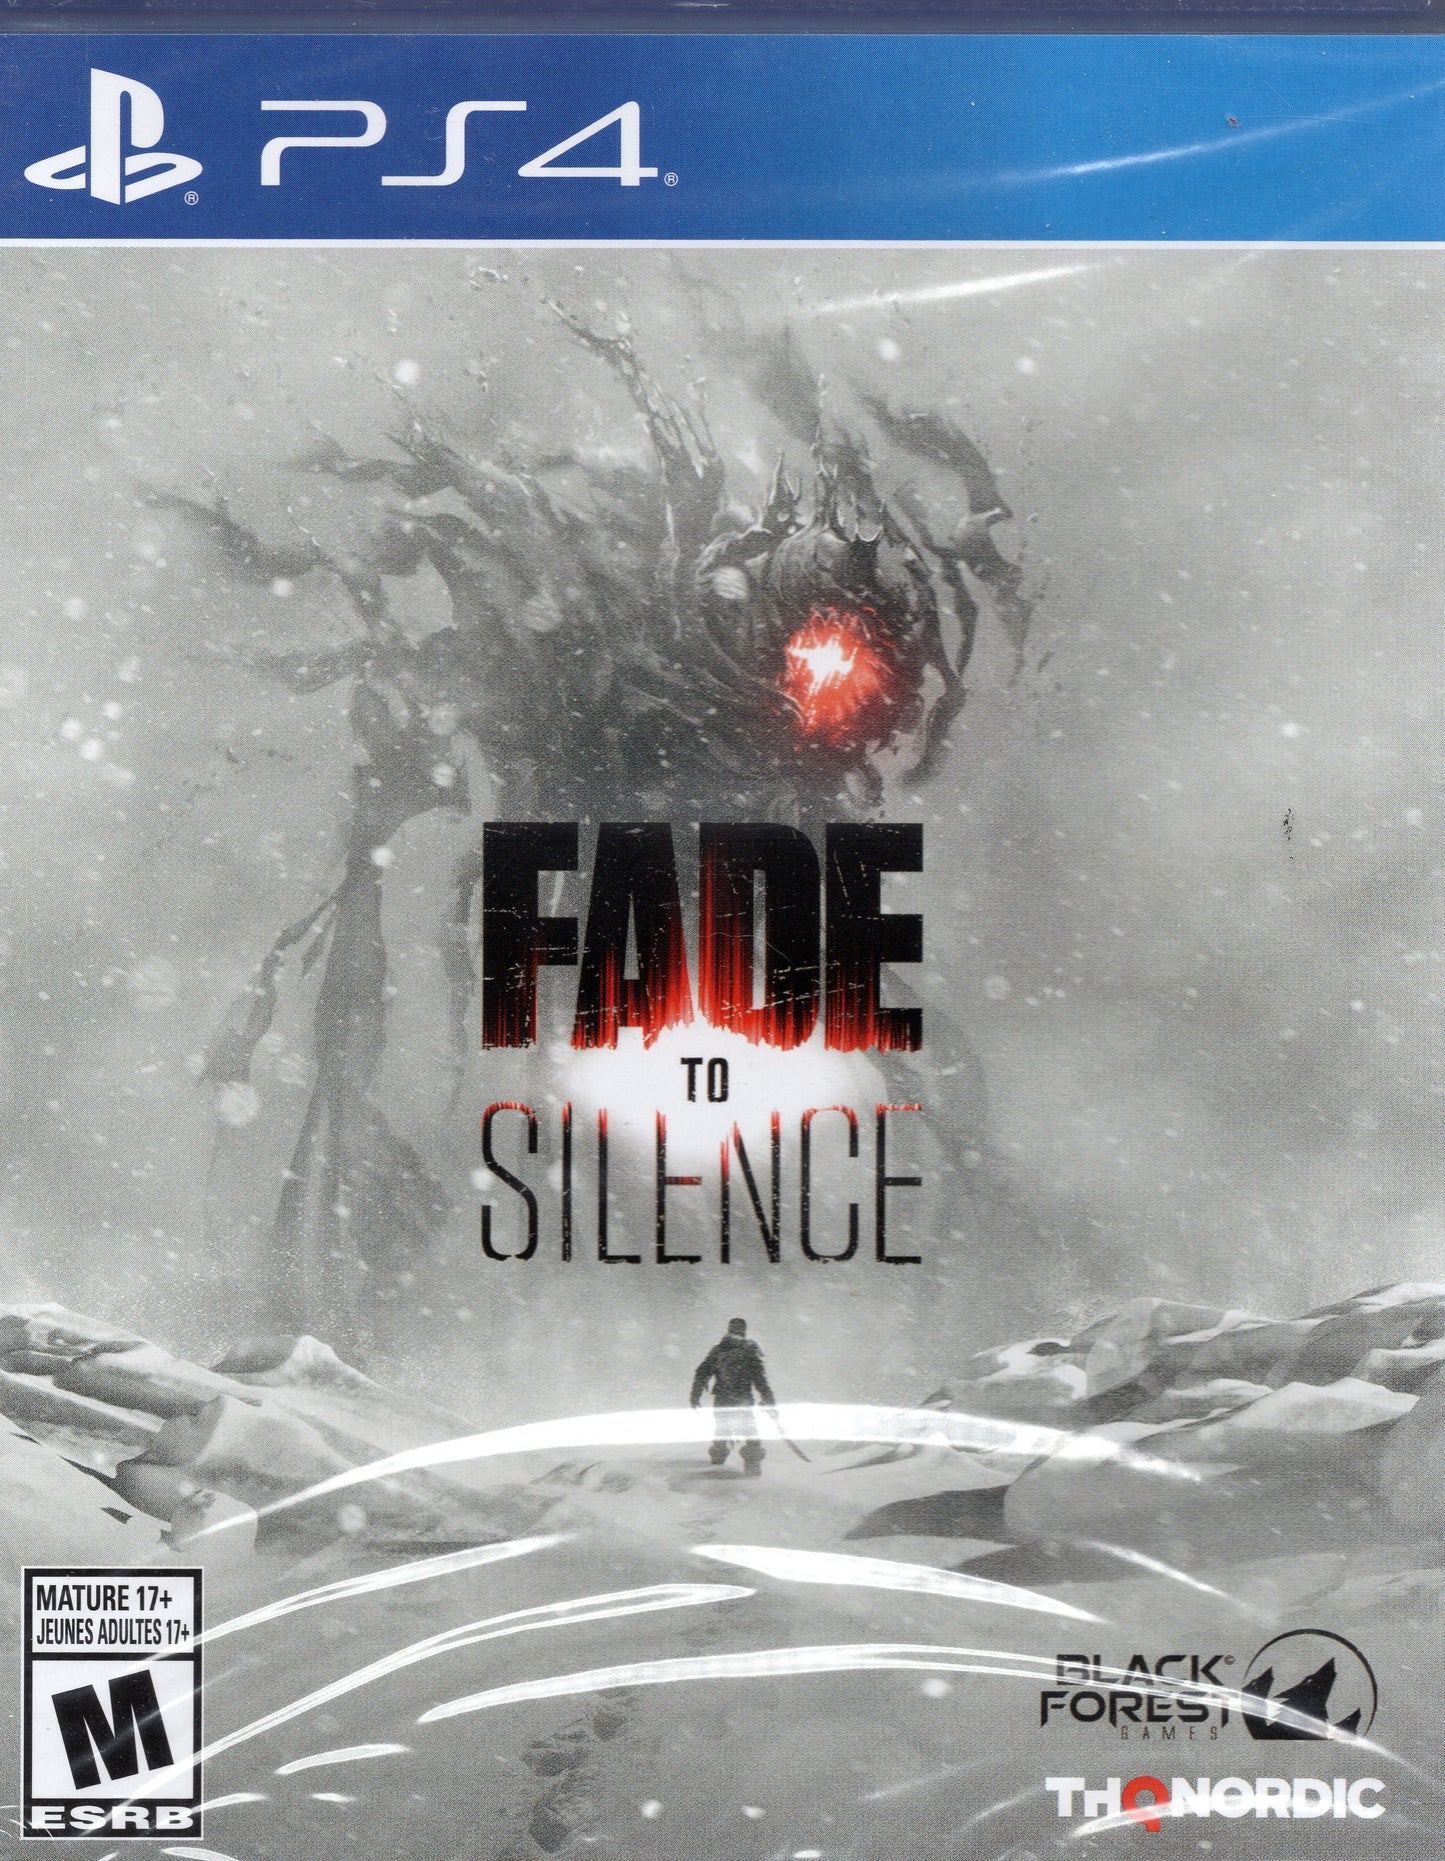 PS4 Fade to Silence